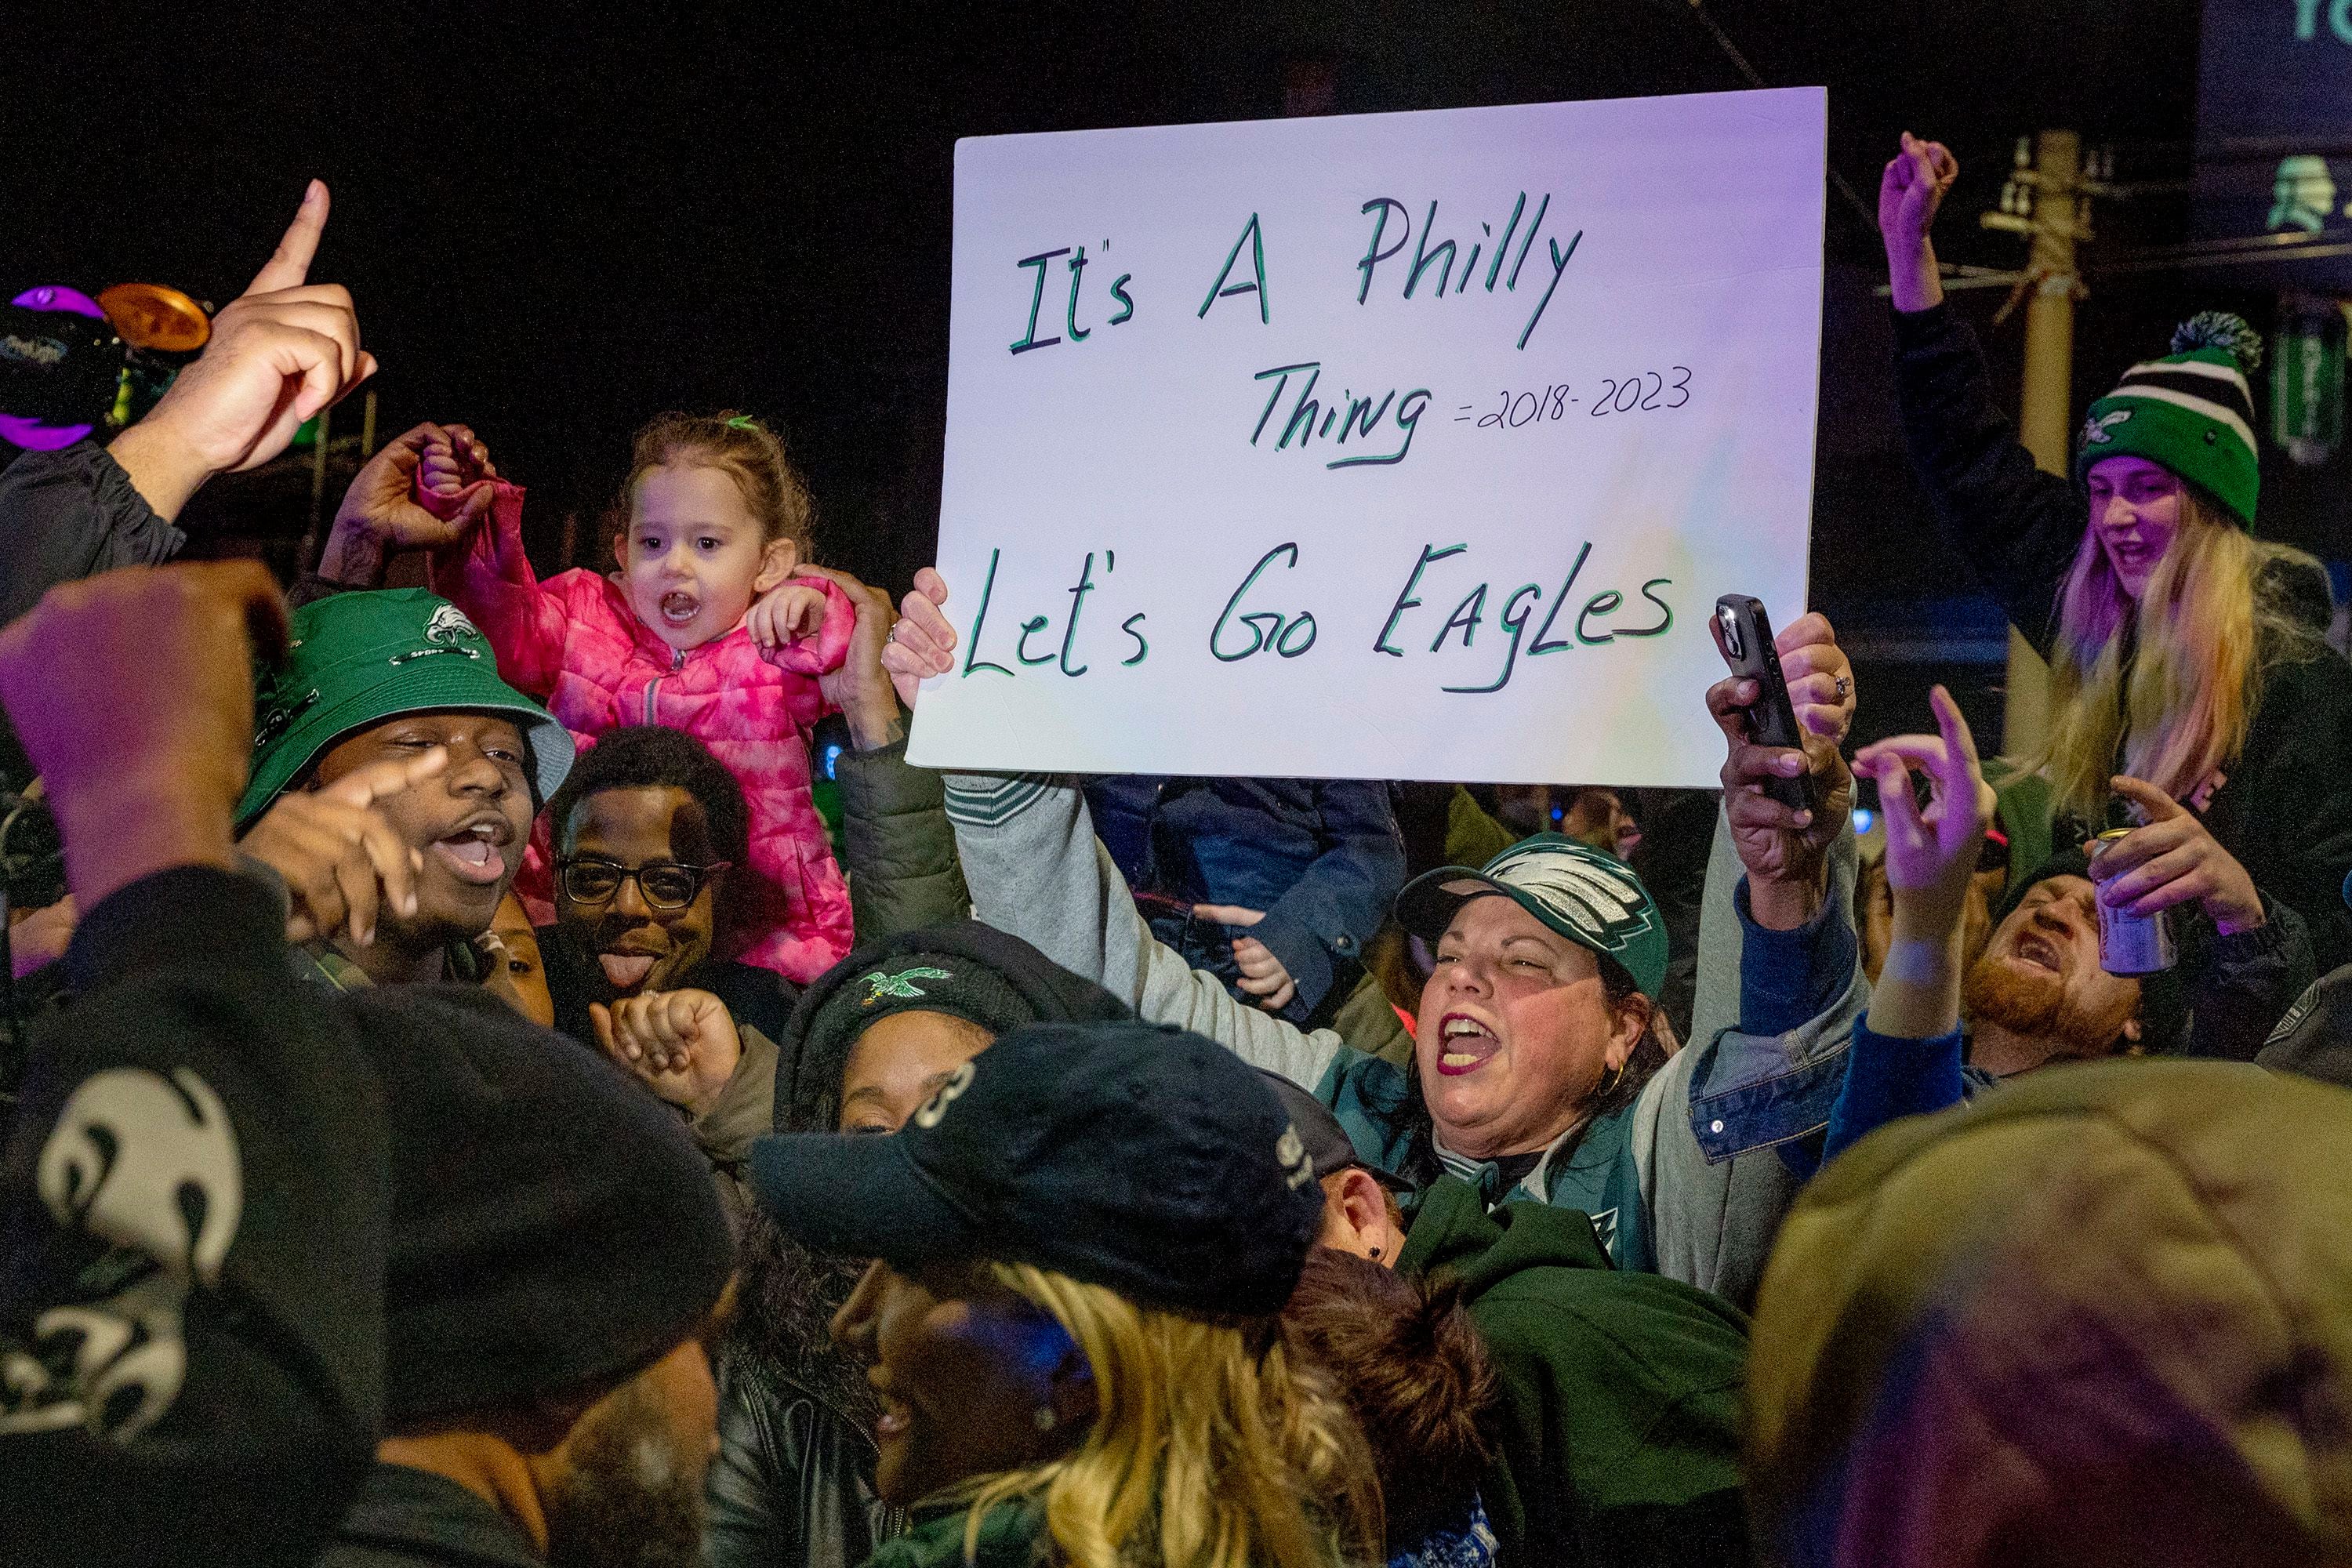 Super Bowl 2023: It's a Philly thing is the Eagles' slogan, but what does  it mean?